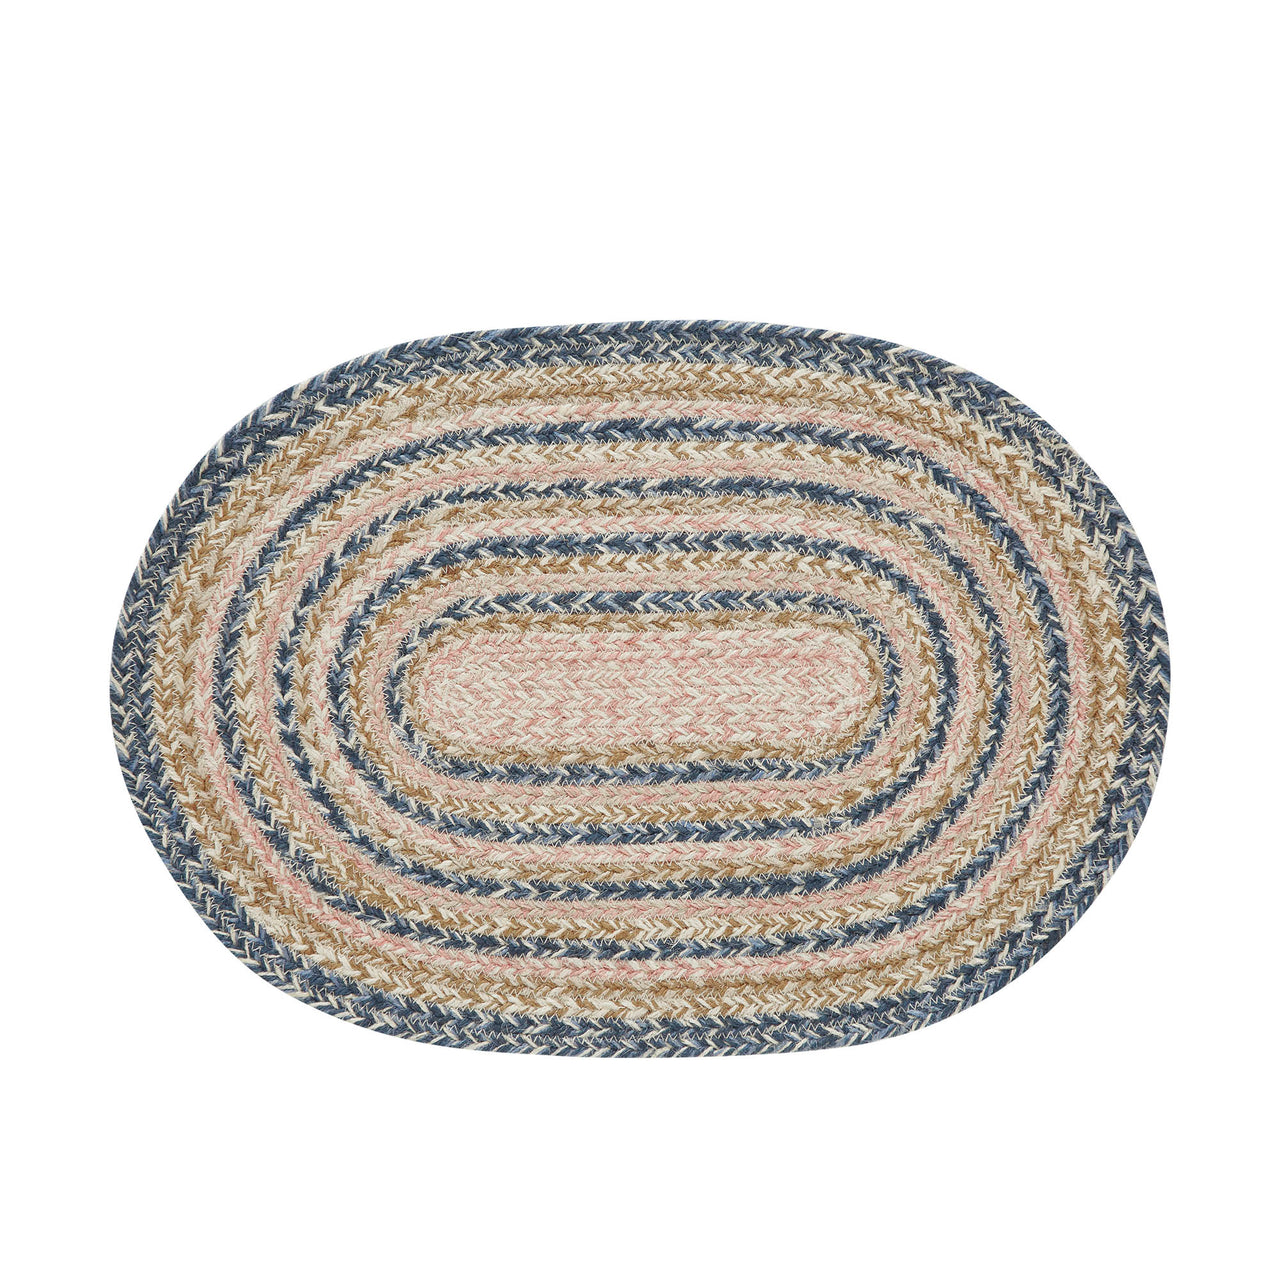 Kaila Jute Braided Oval Placemat 13"x19" VHC Brands